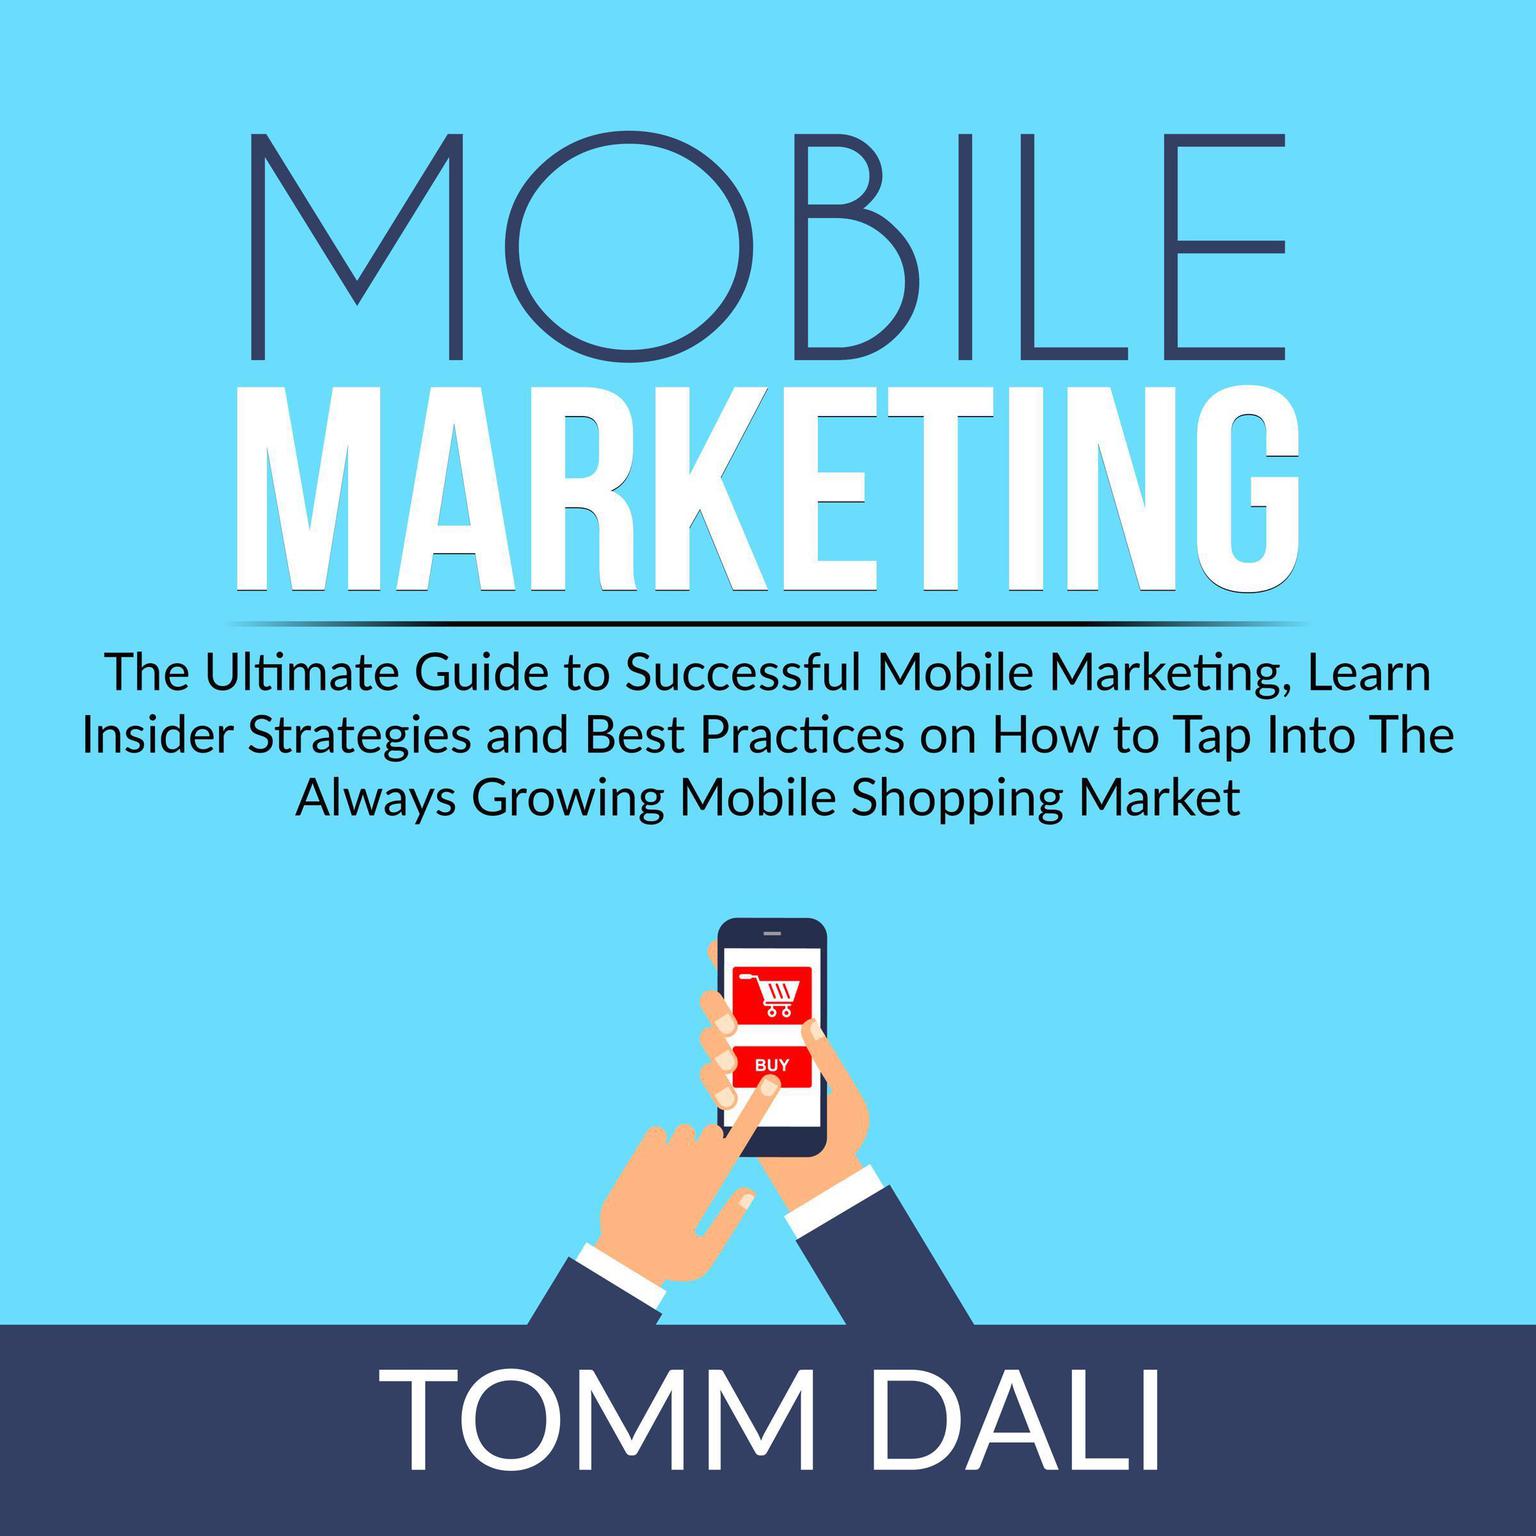 Mobile Marketing: The Ultimate Guide to Successful Mobile Marketing, Learn Insider Strategies and Best Practices on How to Tap Into The Always Growing Mobile Shopping Market Audiobook, by Tomm Dali